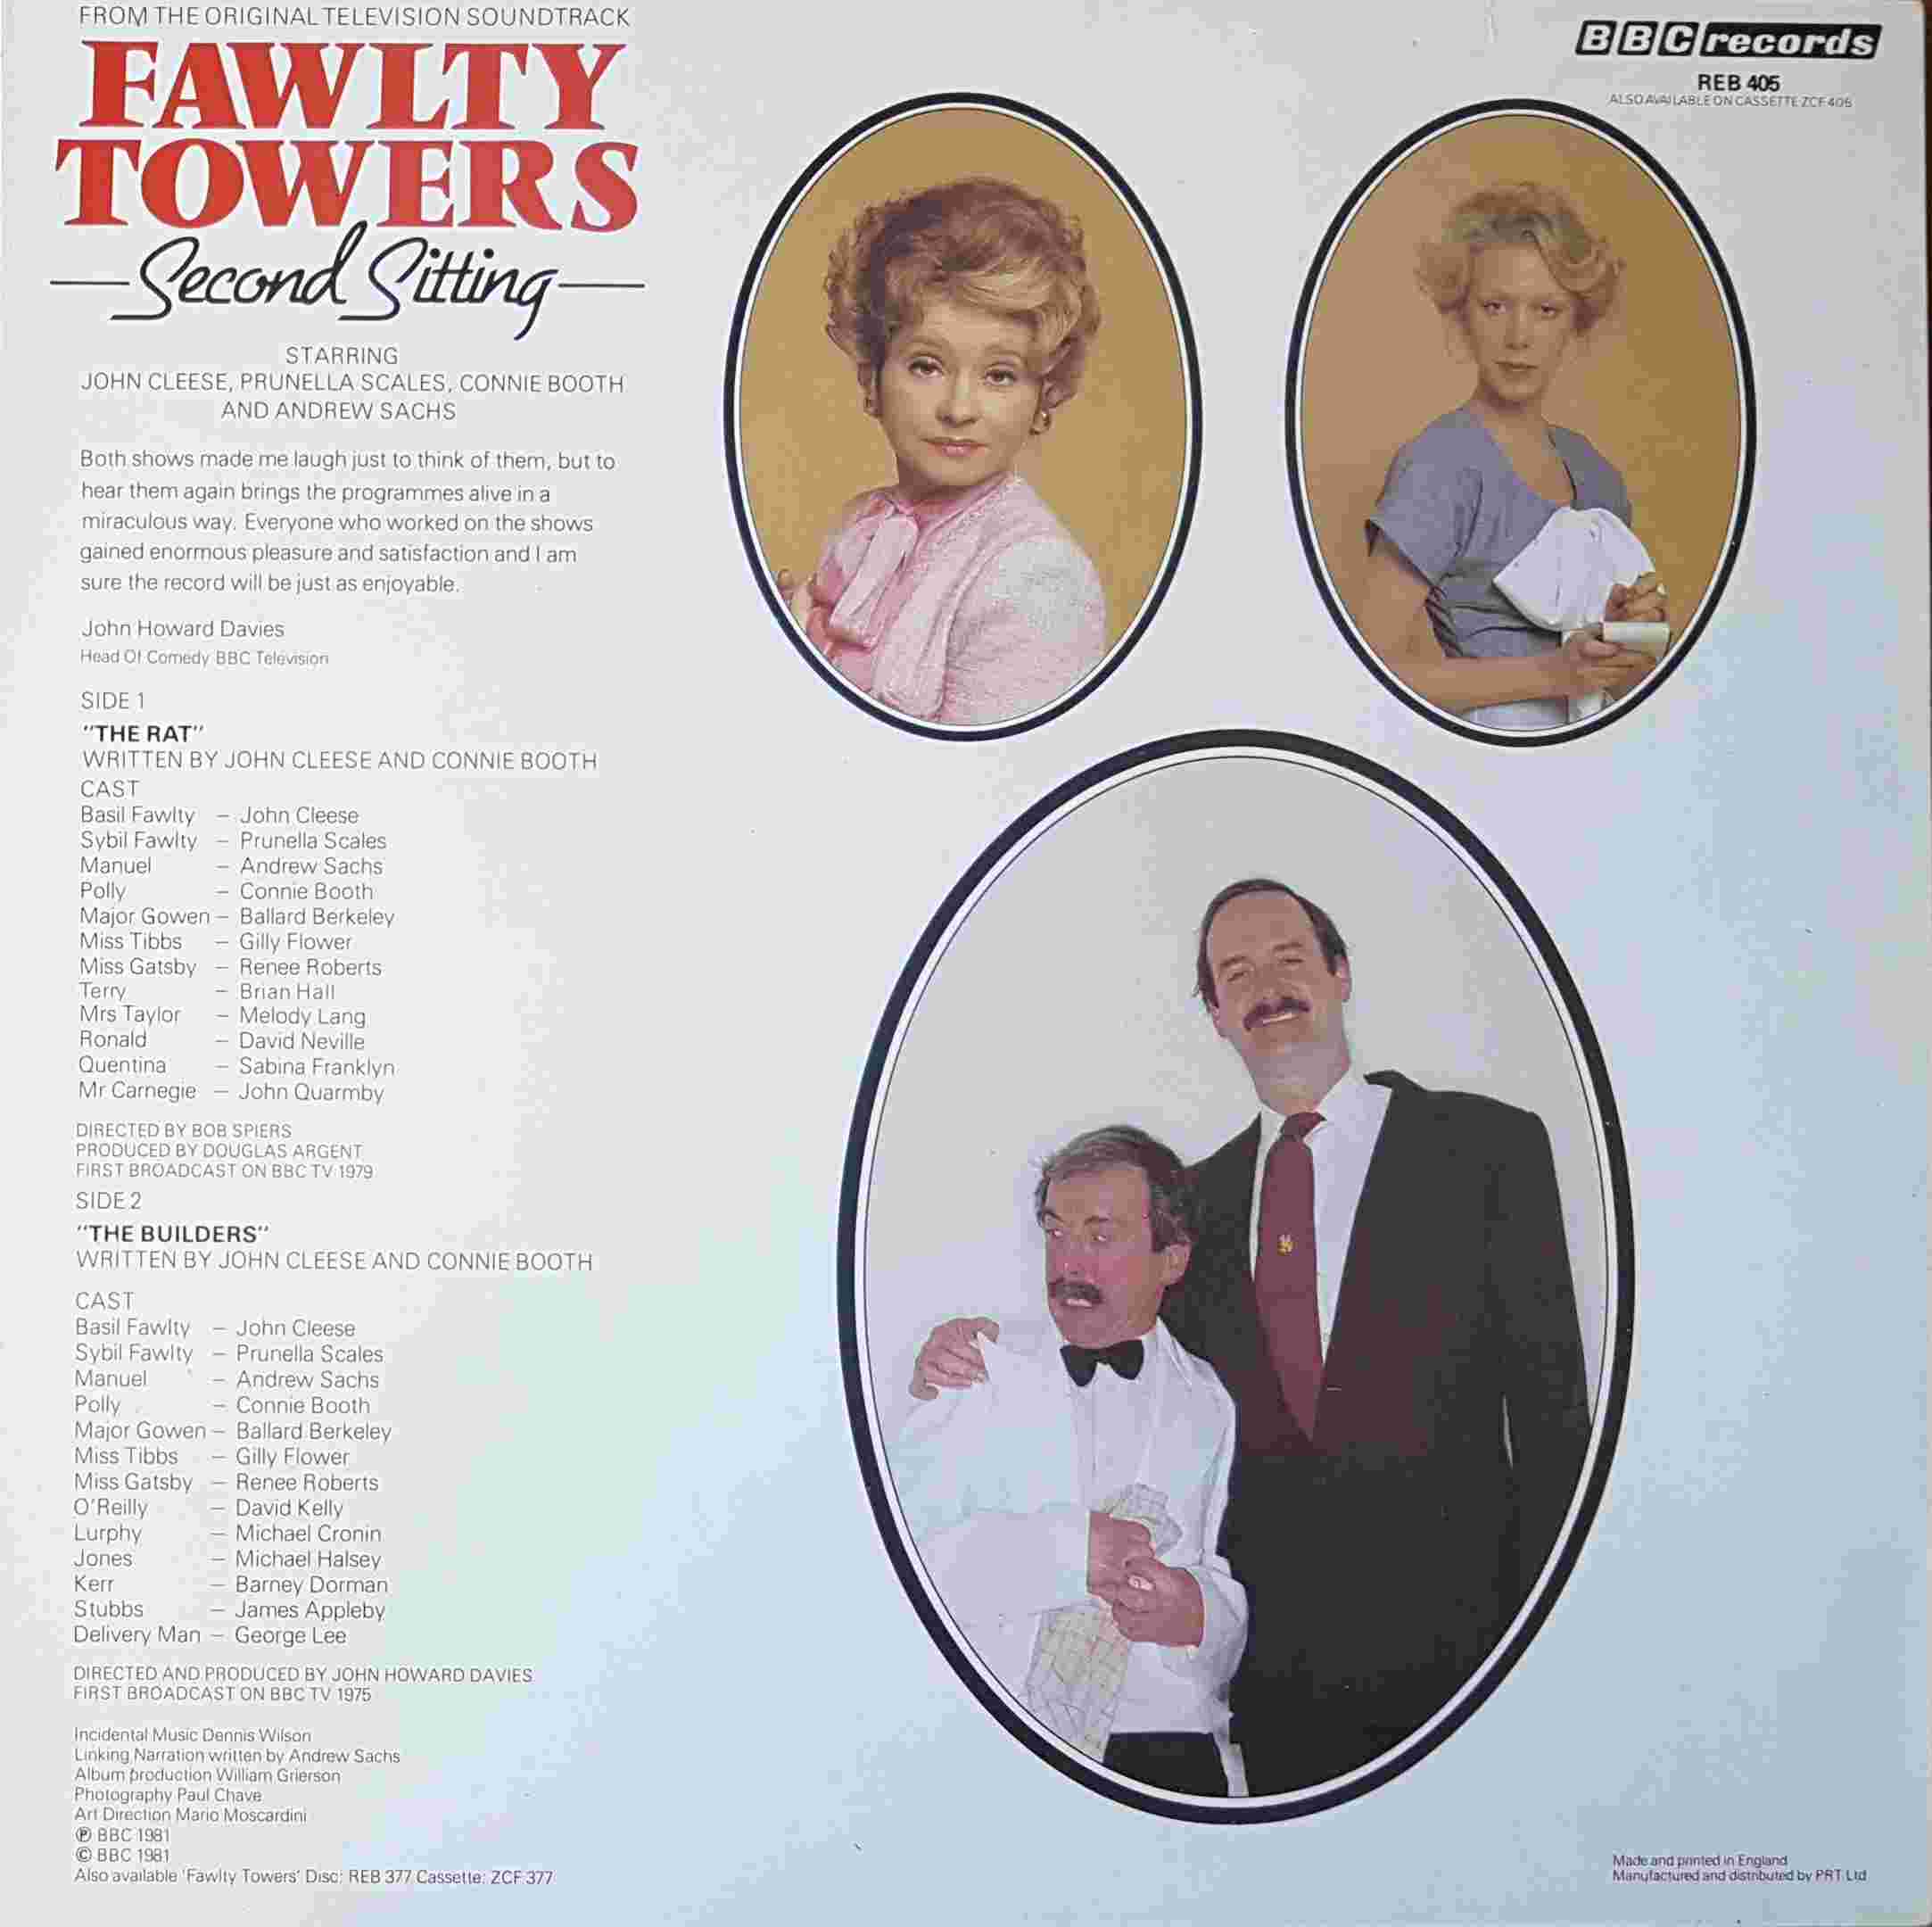 Picture of REB 405 Fawlty Towers - Second sitting by artist John Cleese / Connie Booth from the BBC records and Tapes library